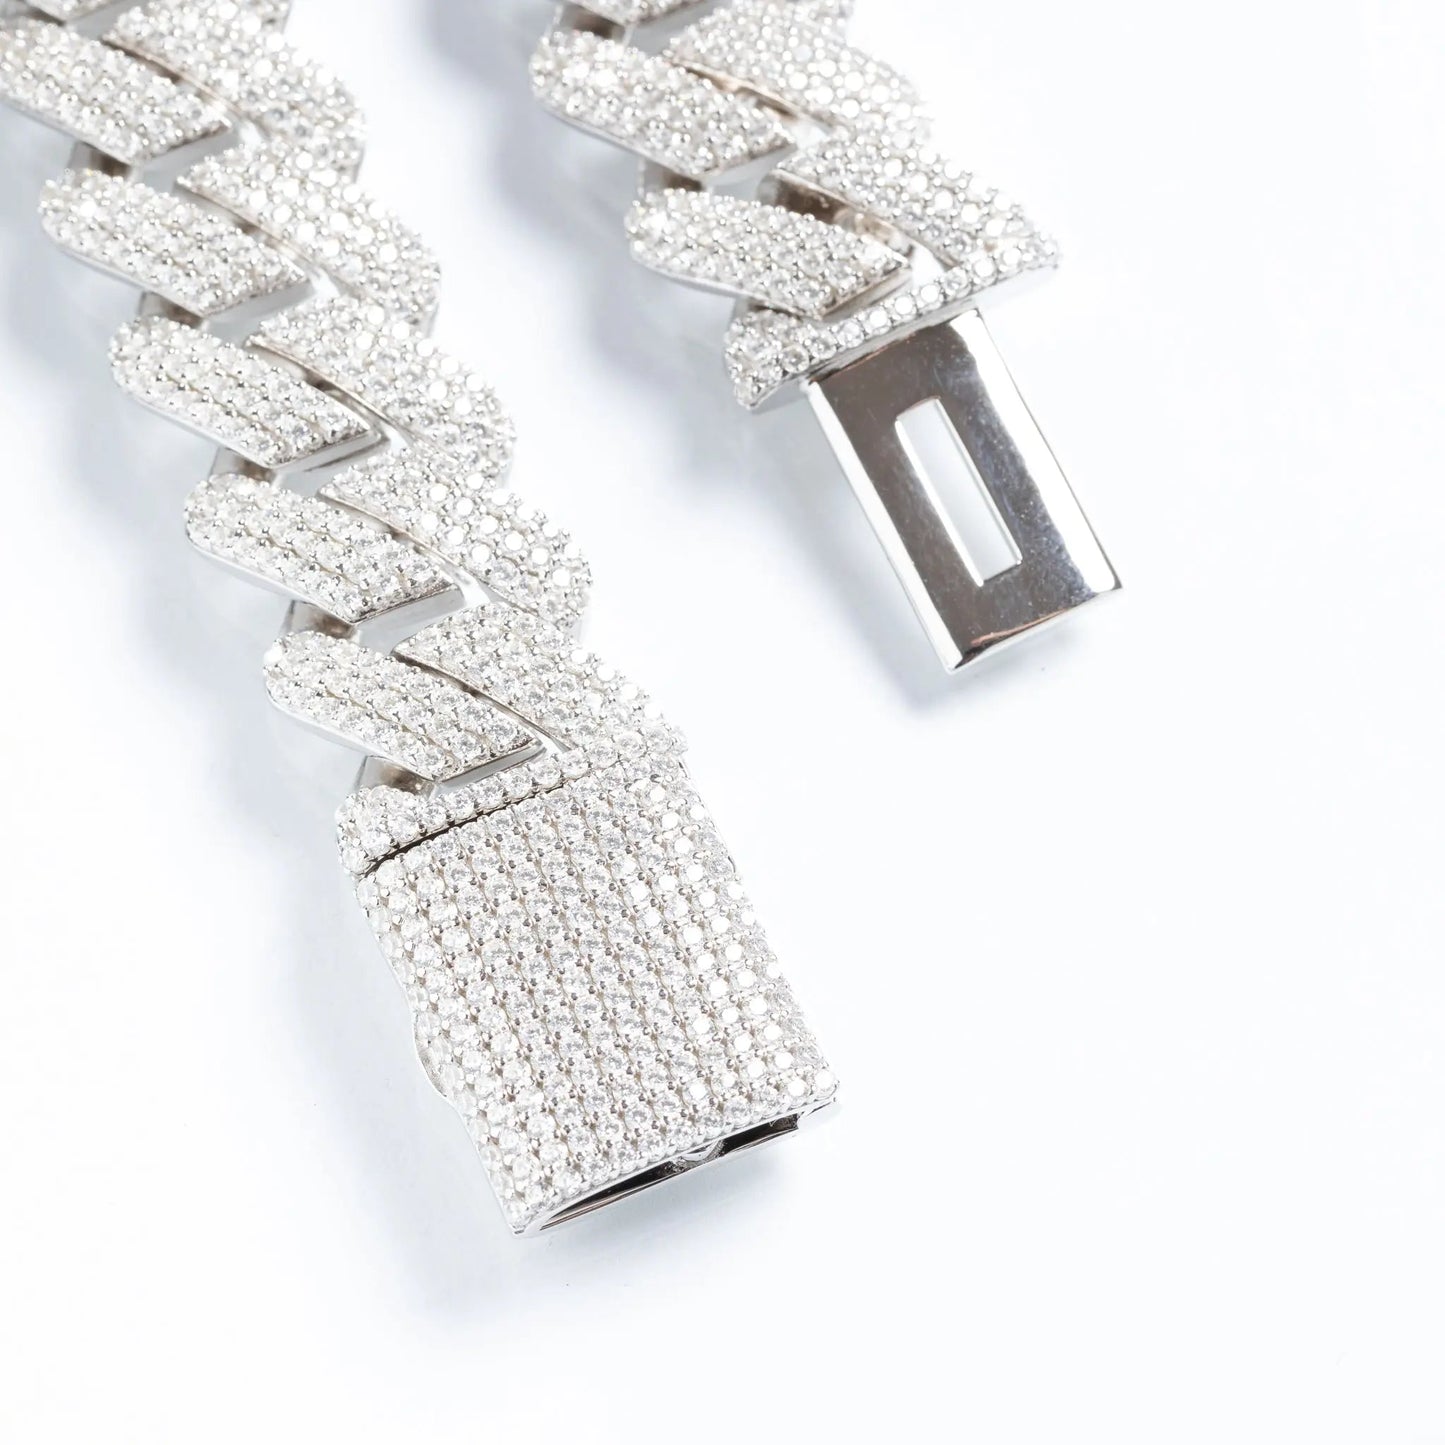  Tyresse 19mm Iced Prong Cuban Chain + Bracelet - White Gold